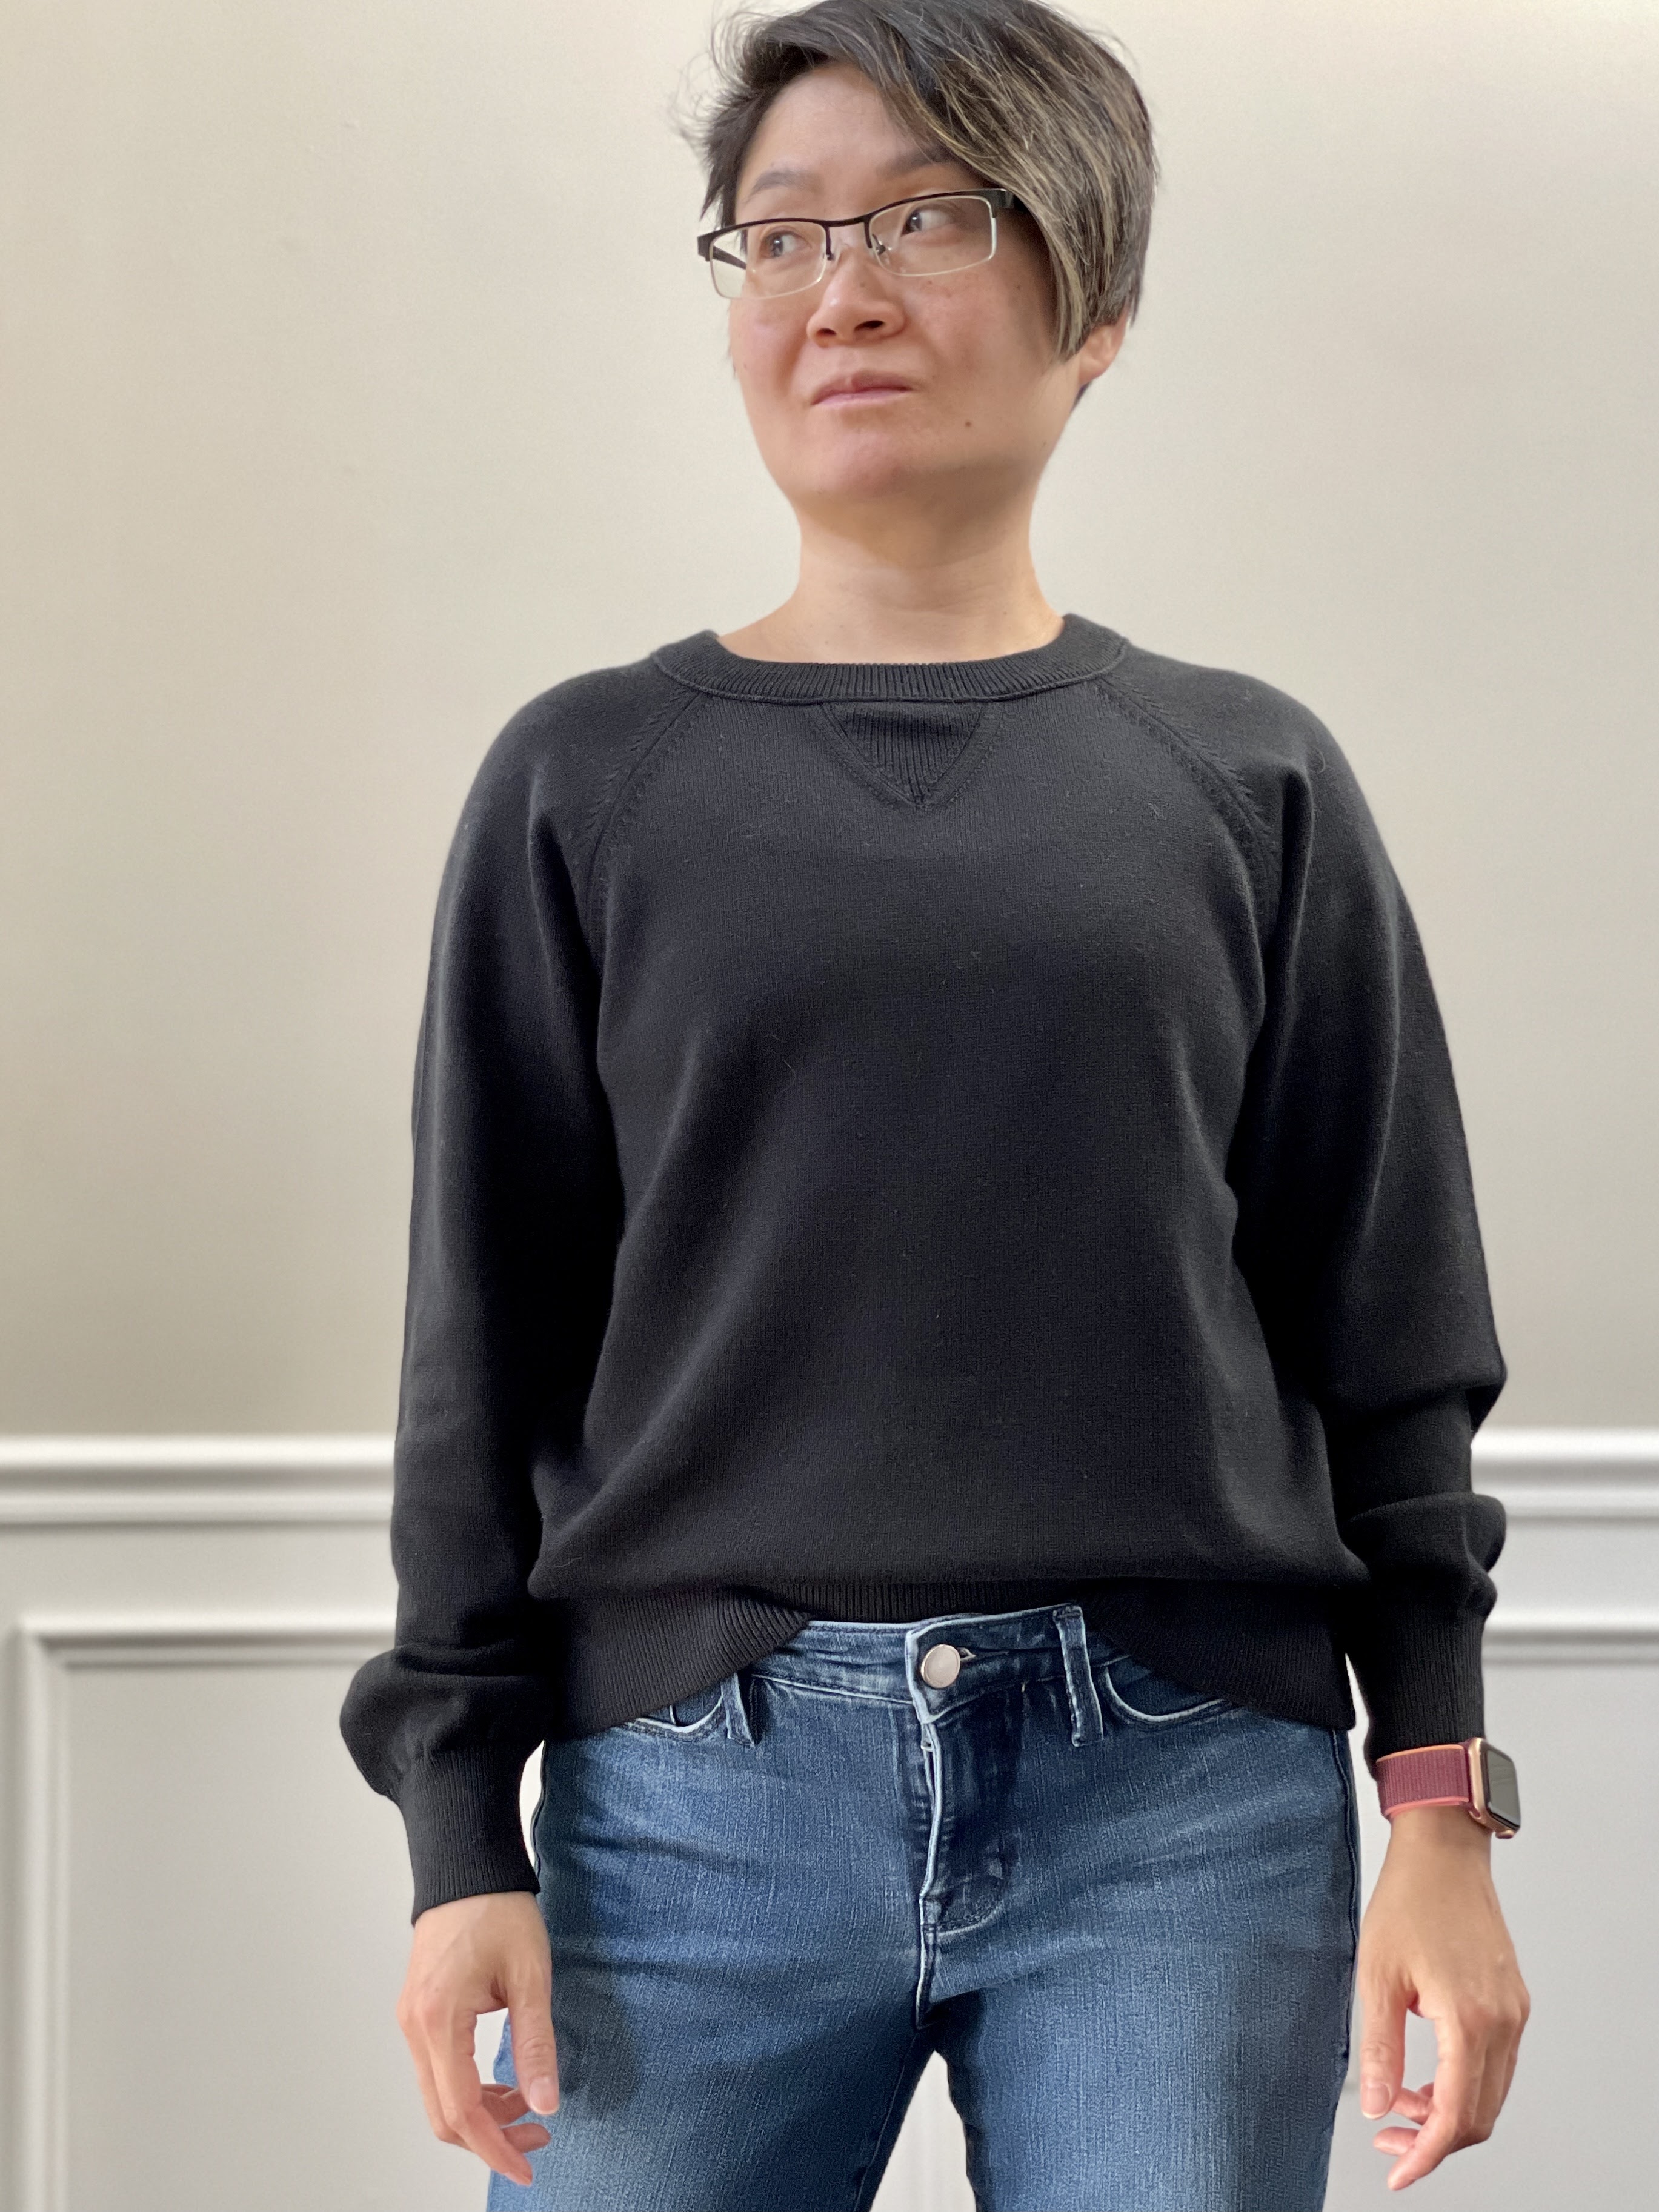 Fit Review Friday! J.Crew Cotton Cashmere Pullover Sweatshirt & V